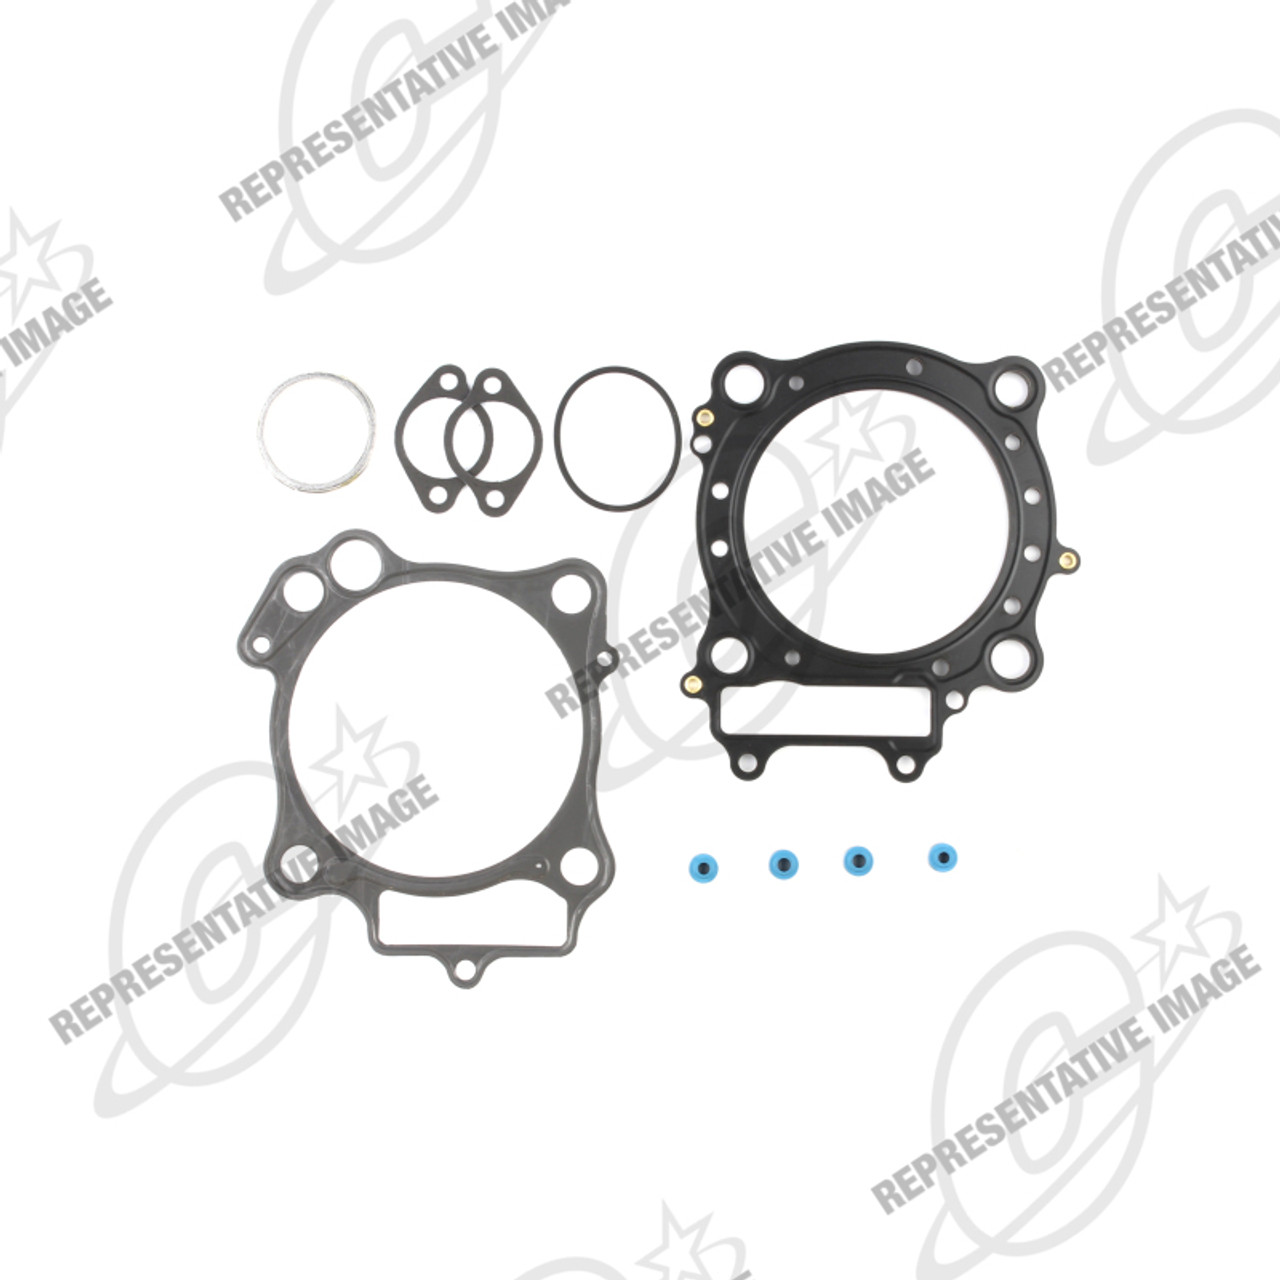 Cometic Harley-Davidson 3.875in 1550 Twin Cam .060 Head Gasket - C9135 Photo - Primary